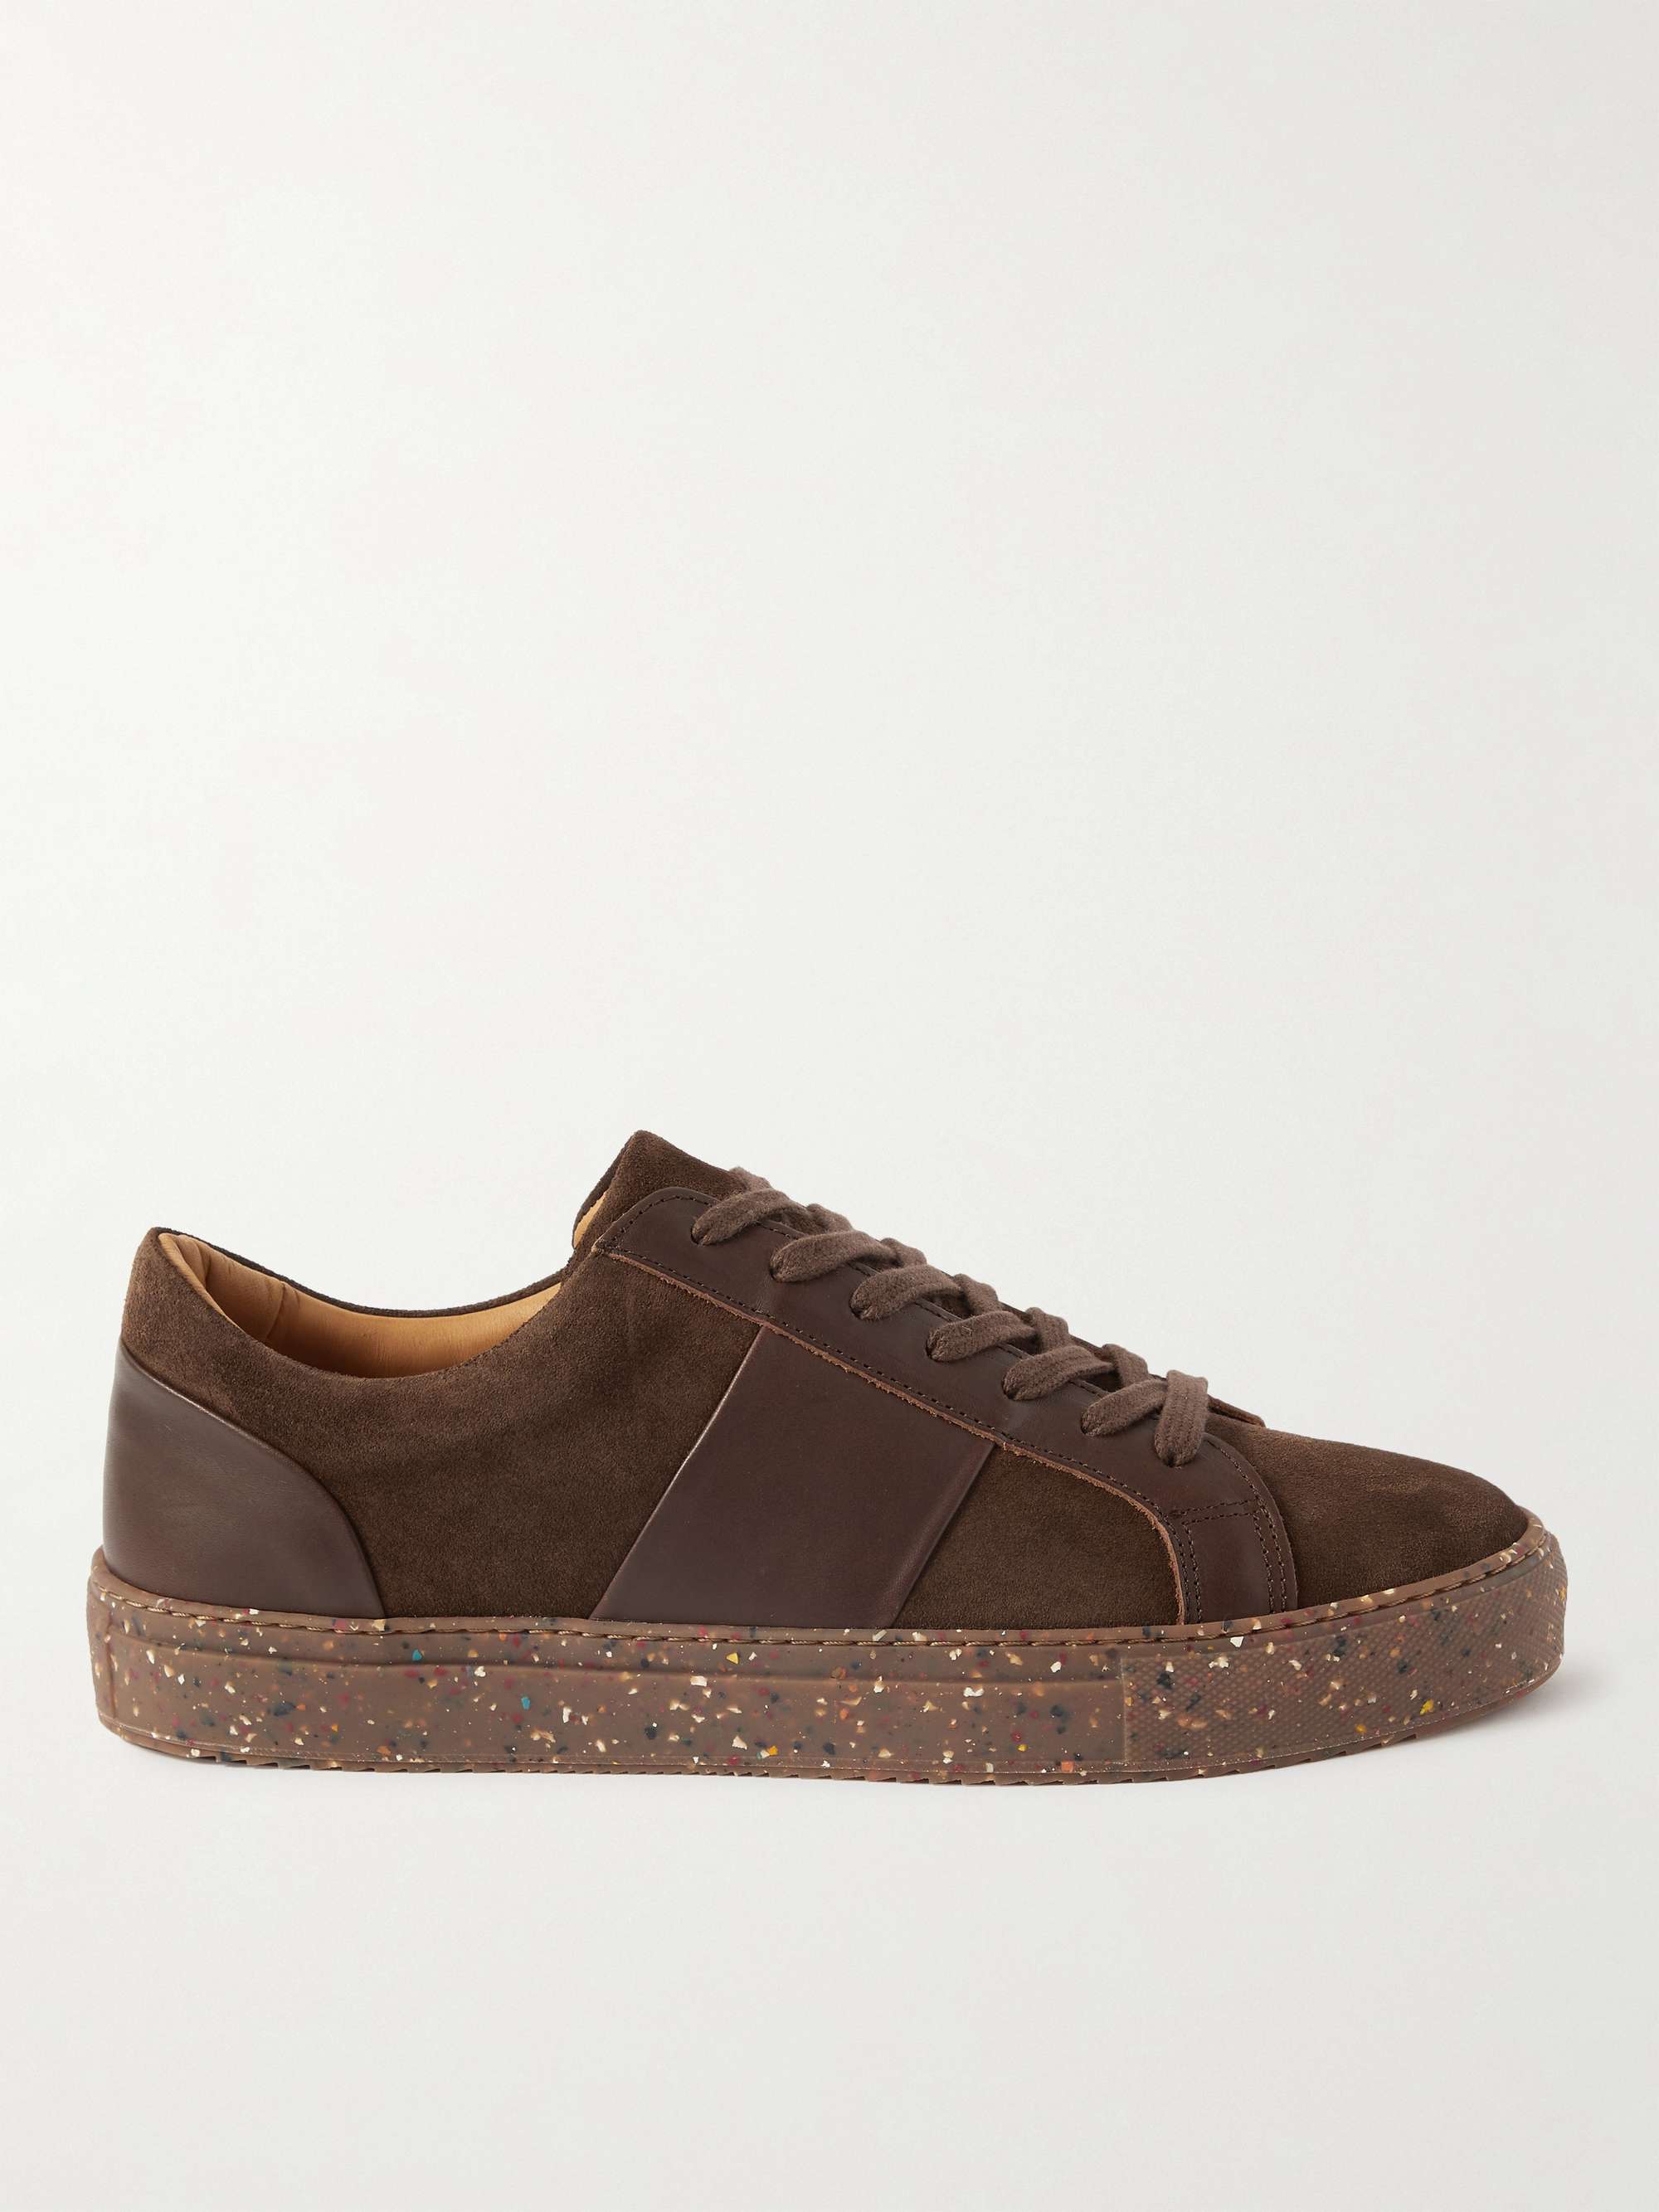 MR P. Larry Leather-Panelled Re-Suede Sneakers